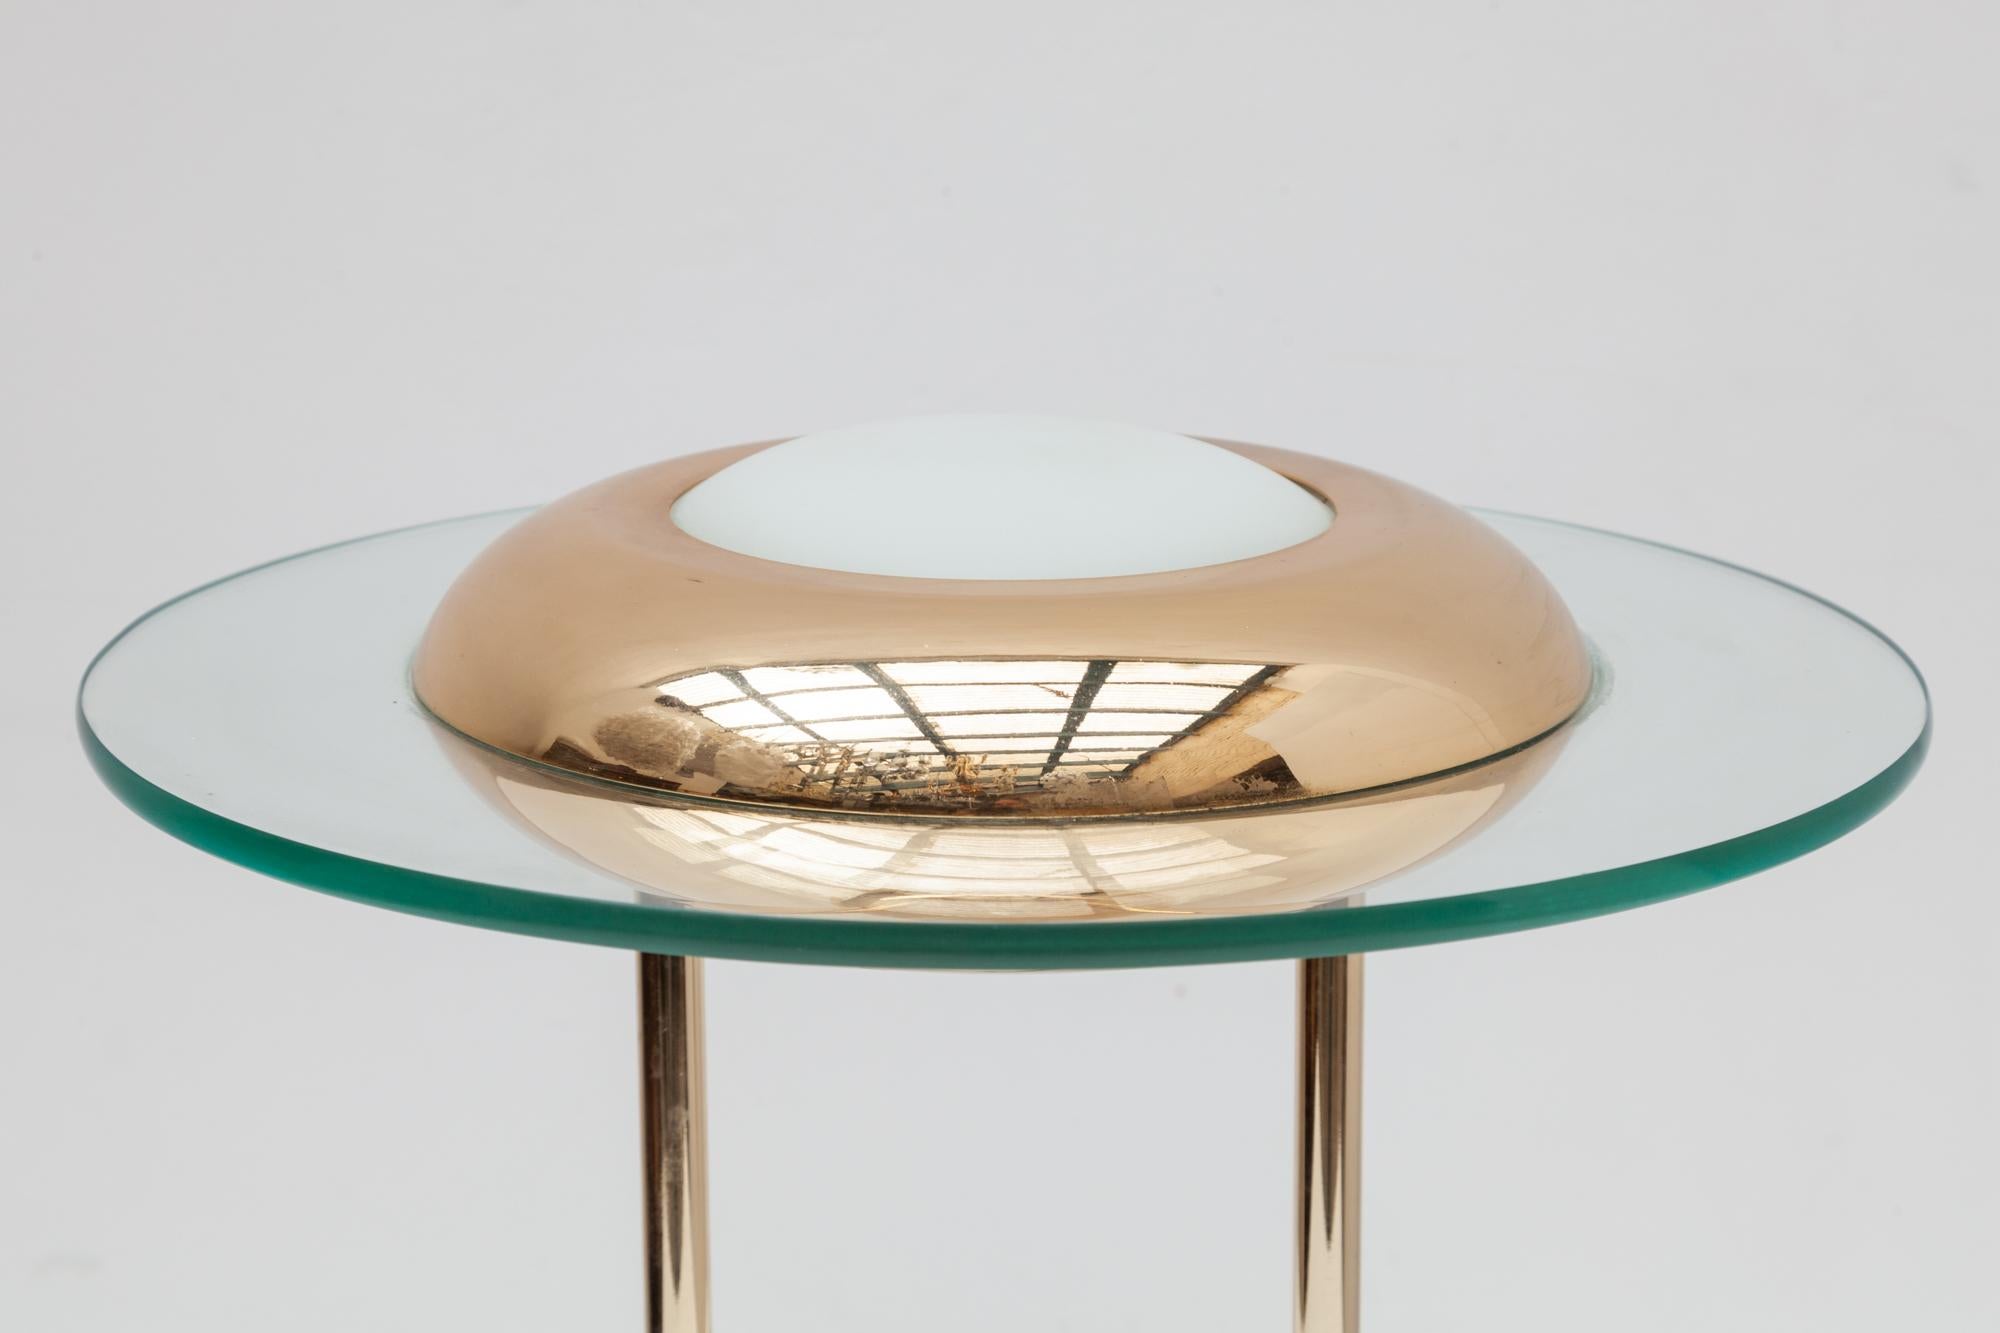 1980s desk, table lamp in the style of Robert Sonneman. A glass ring circles the brass and milk glass shade. Dimmable.